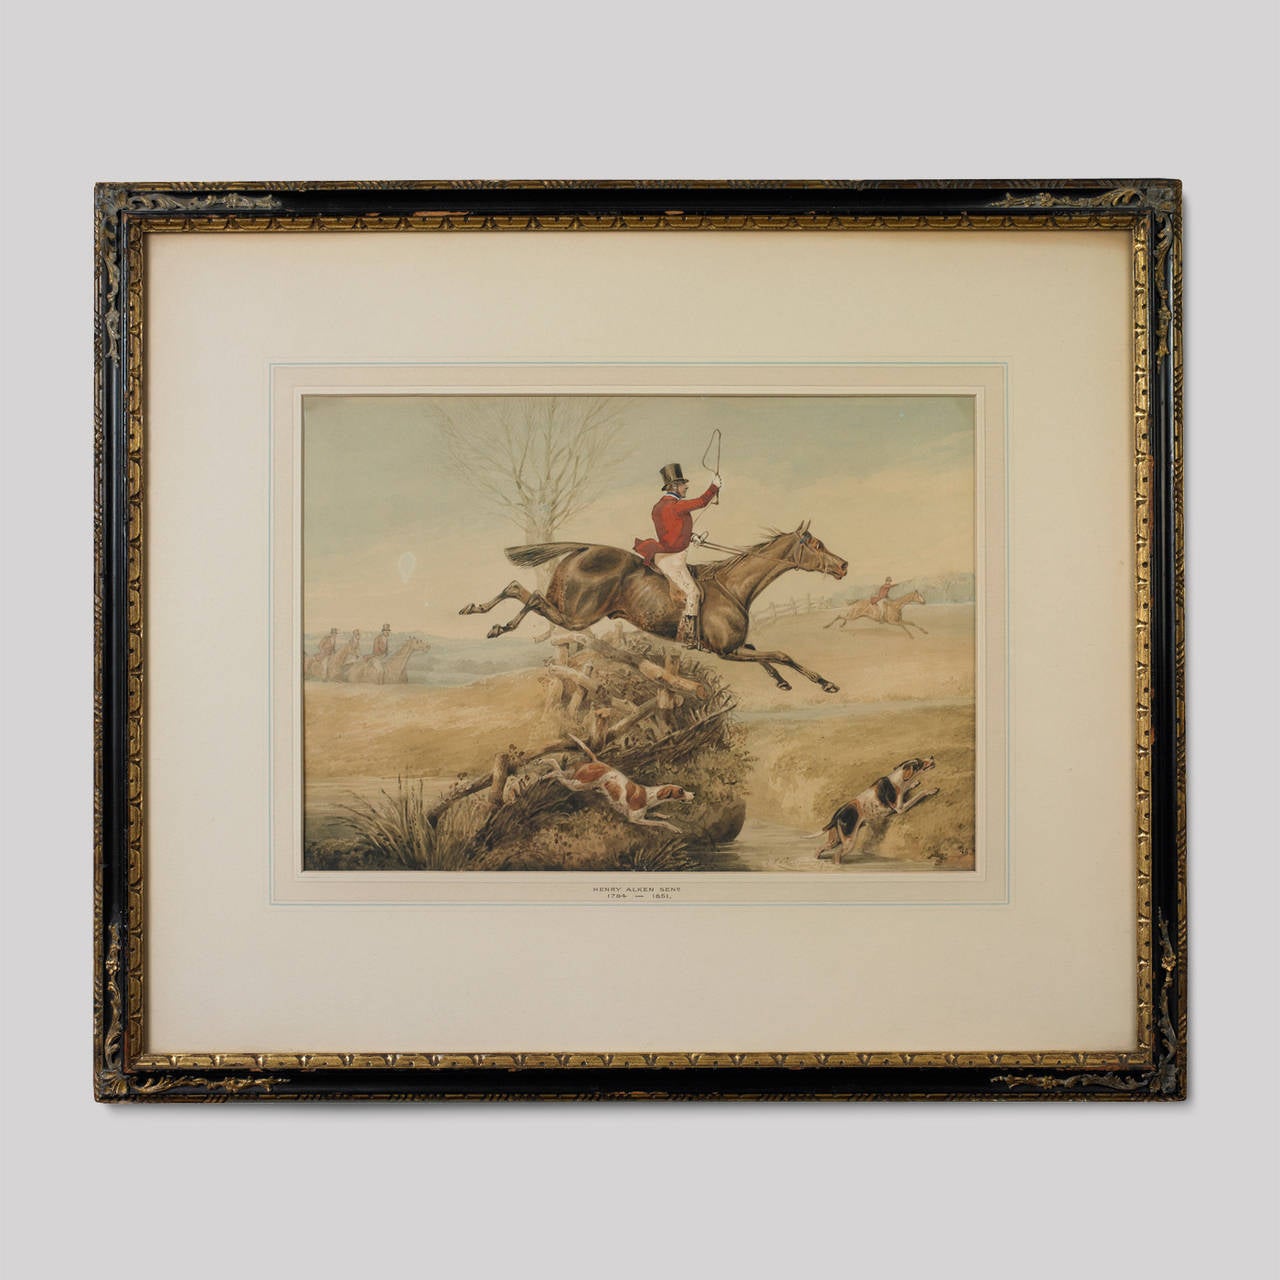 Over a Fence.
Watercolor on paper.
9 x 12 ¾ inches (sight size).
17 ½ x 20 ¾ (framed).

Over the Fence and Stream.
Watercolor on paper.
9 x 12 5/8 inches (sight size).
17 ½ x 20 5/8 inches (framed).

Retains Arthur Ackermann & Son label on